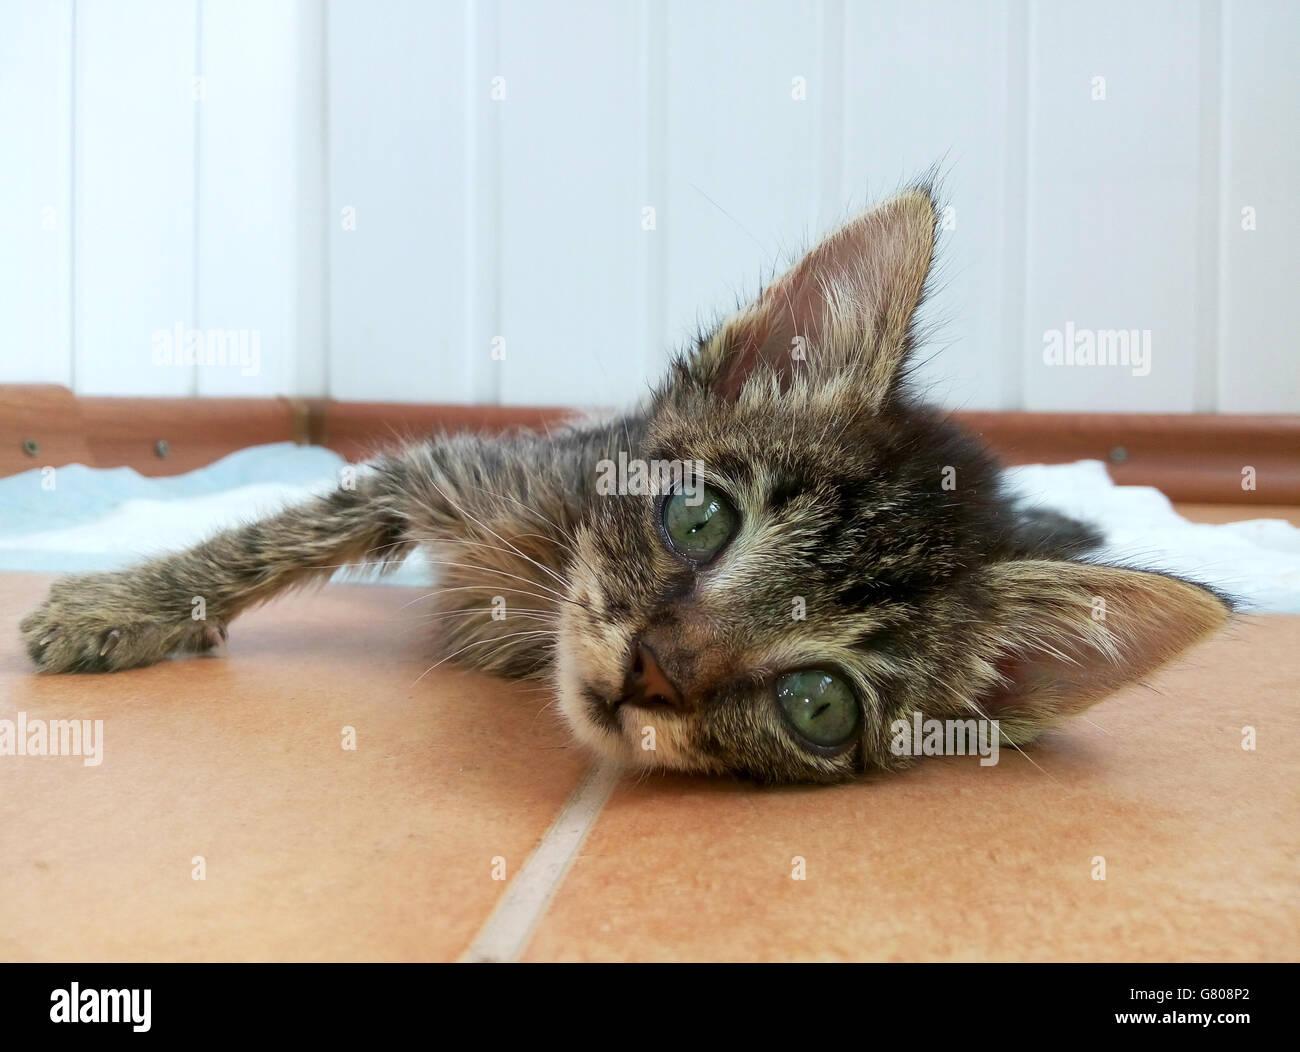 Little sick cat with expressive eyes lying on the floor. Stock Photo